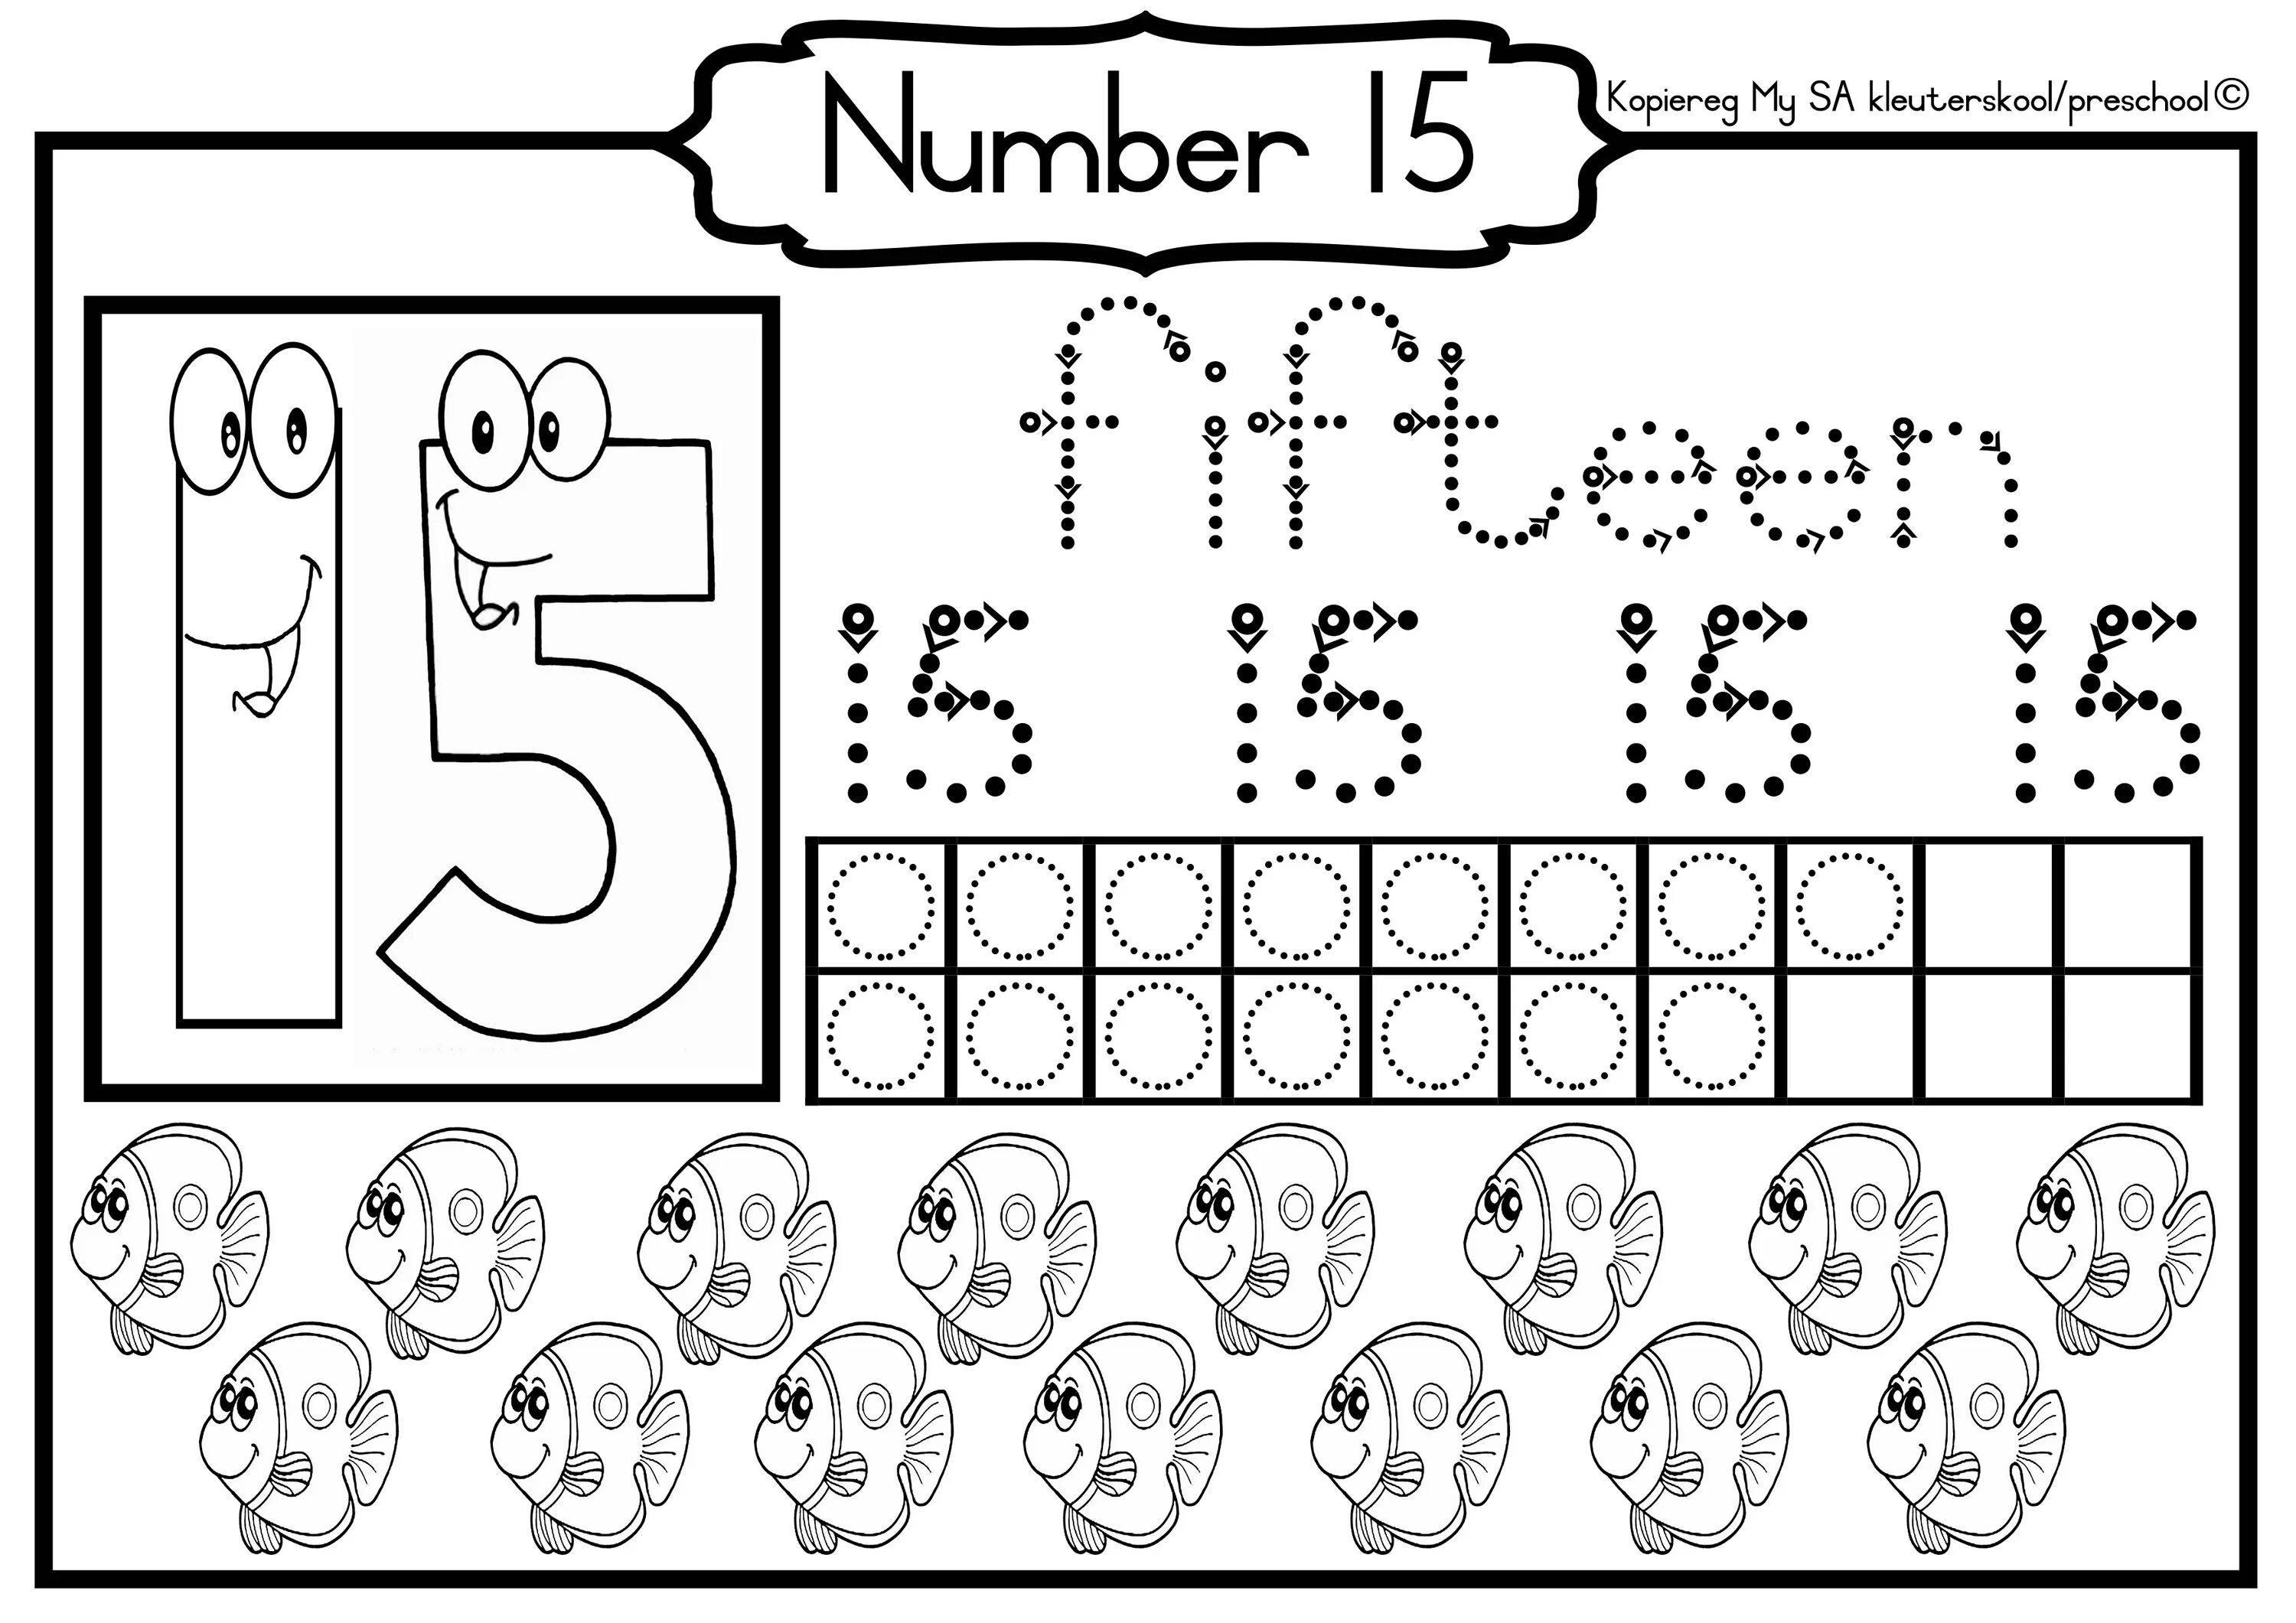 15 to 18 s. Цифры Worksheets. Count 1-15. Numbers 1-5 гусеницы for Kids. Число 11 раскраска.